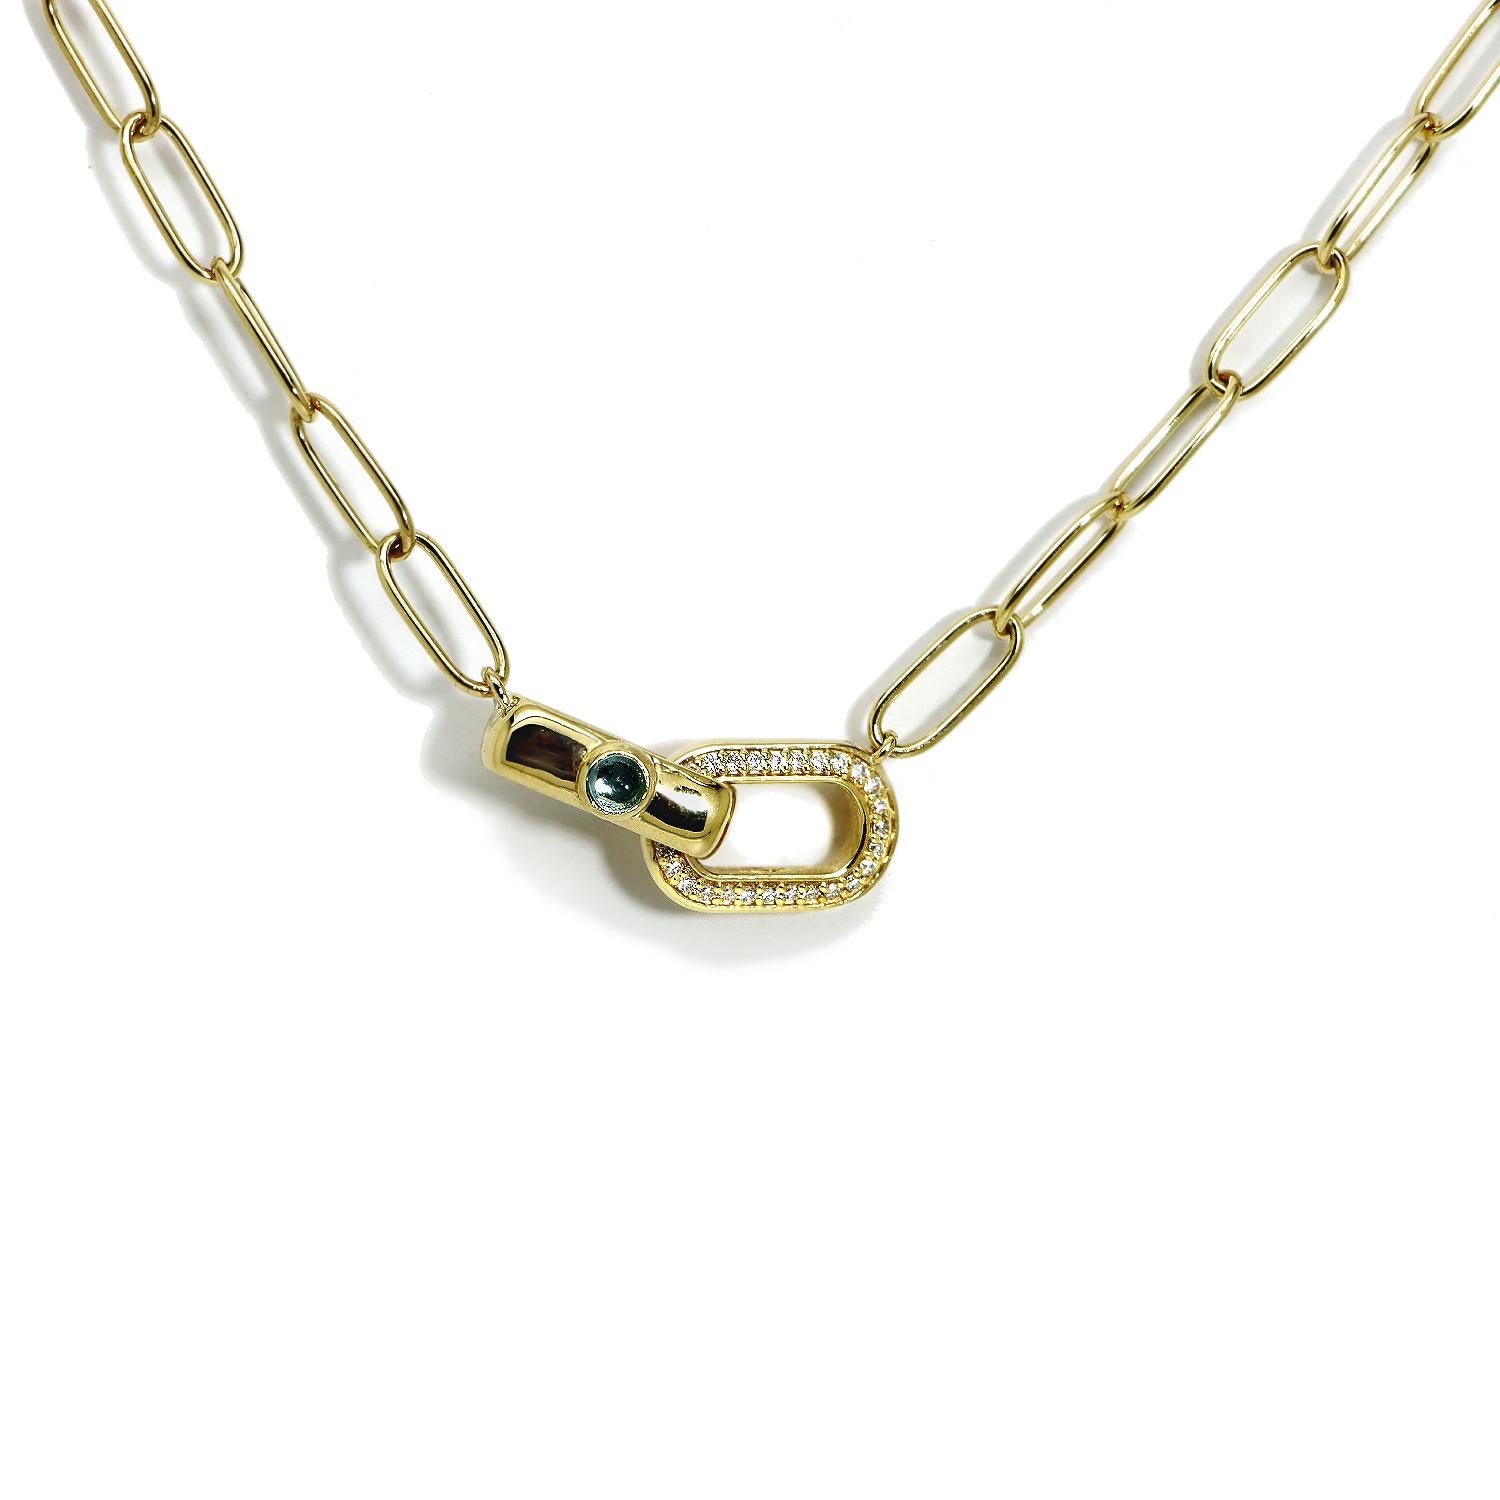 When diamonds and a bit of colour are your thing. Our Diamond oval link chain necklace in luxurious 18k gold is the perfect necklace. Dress it up, dress it down - looks amazing with a crisp white shirt and jeans as well as a smart suit for a